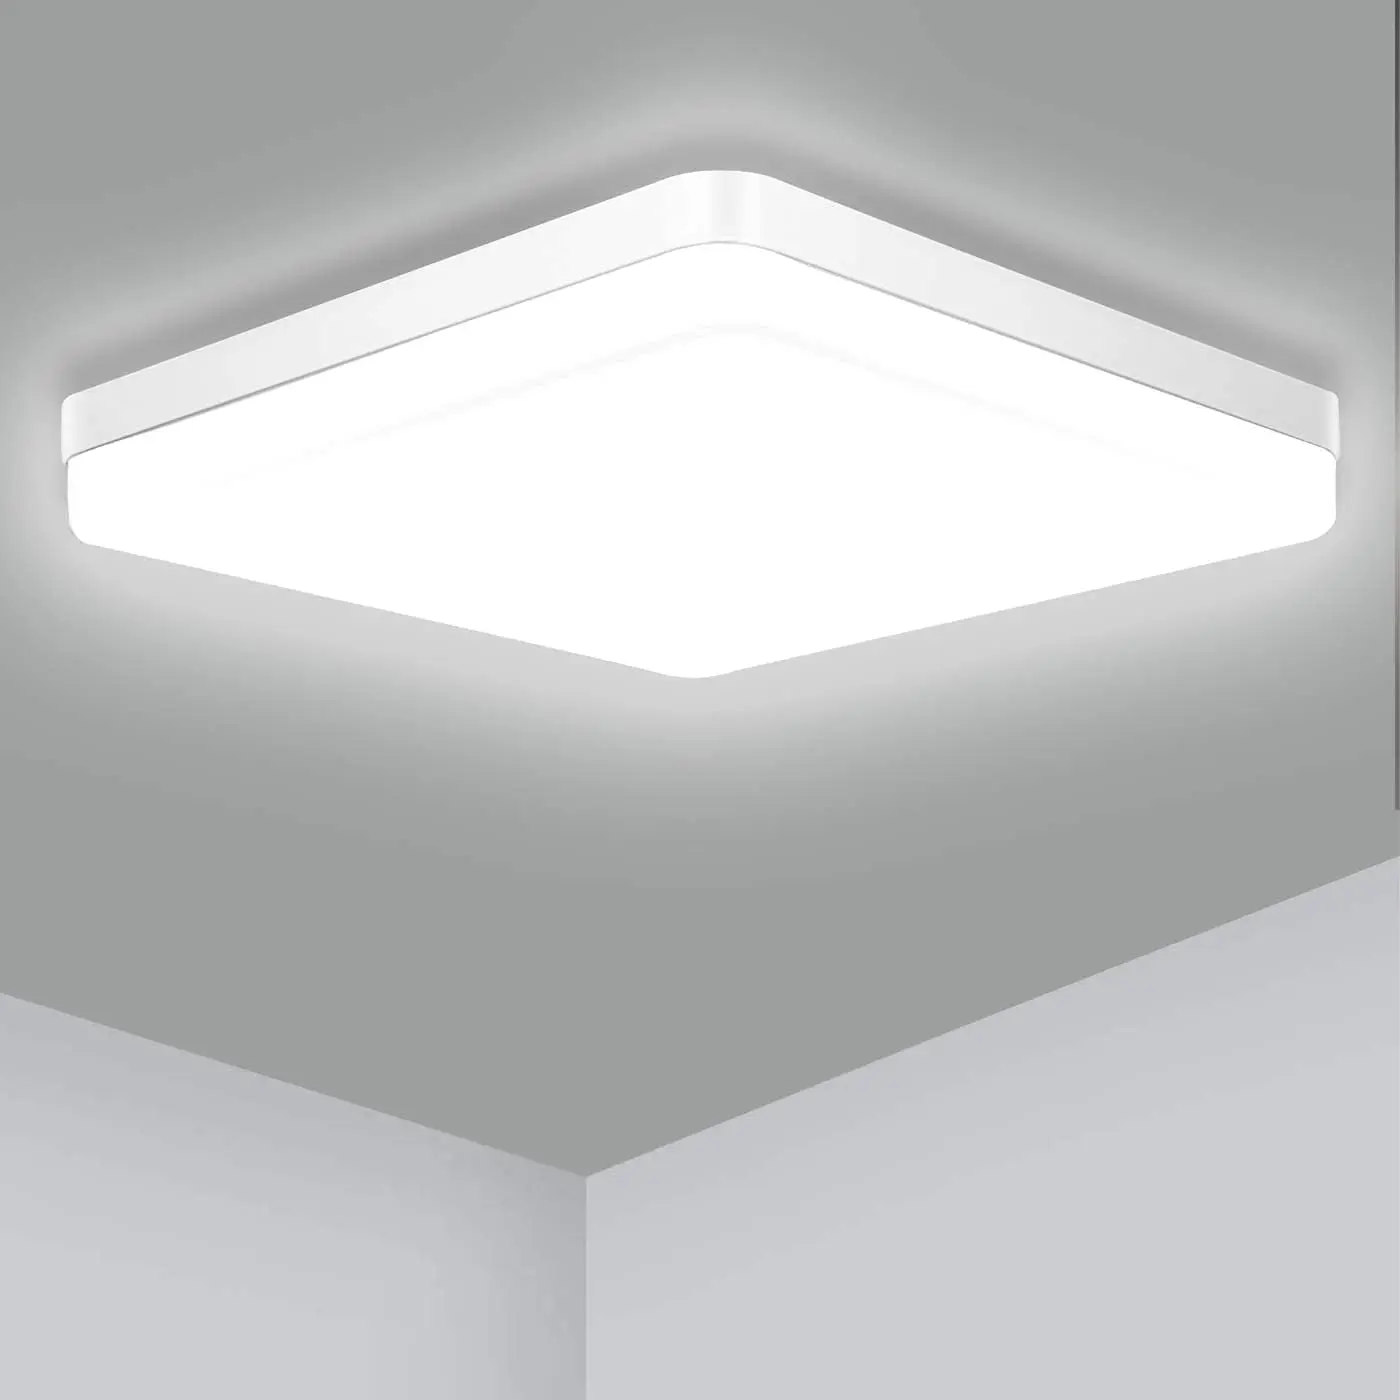 Re led ceiling light bedroom light neutral white cool white warm white 48w 36w 24w thumb155 crop